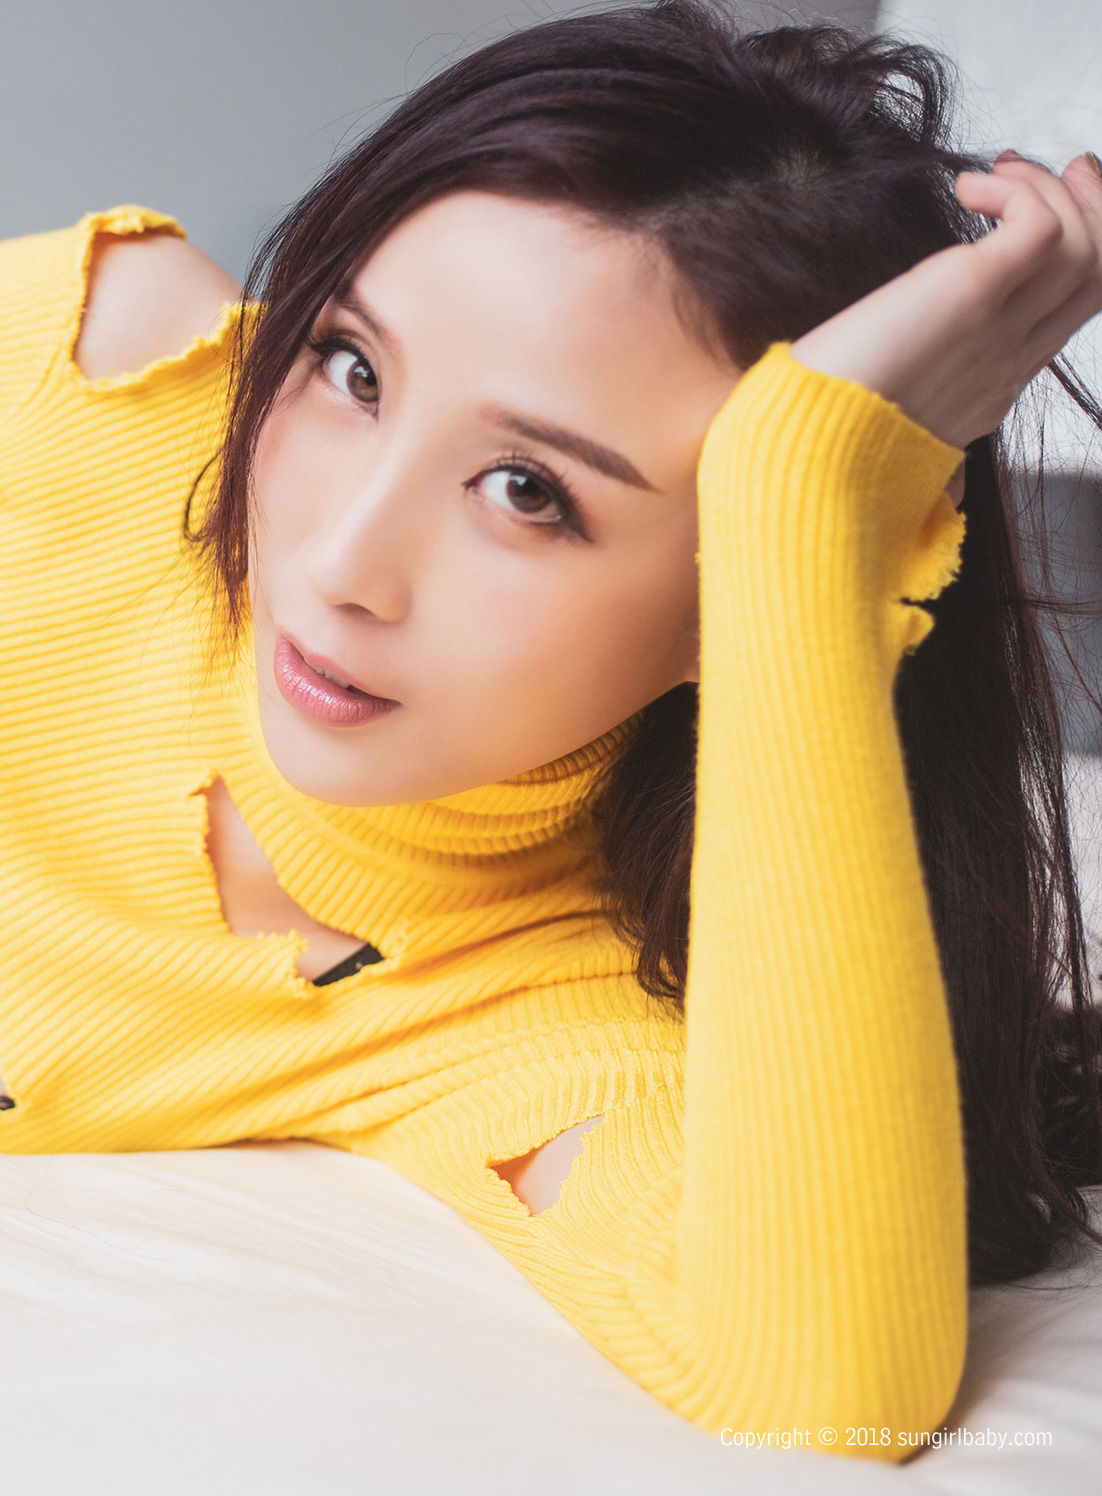 Huang and Canto Irenea “Yellow Temptation!
Mantian loves you “[Sunshine Baby Sungirl] No.007 Photo Collection